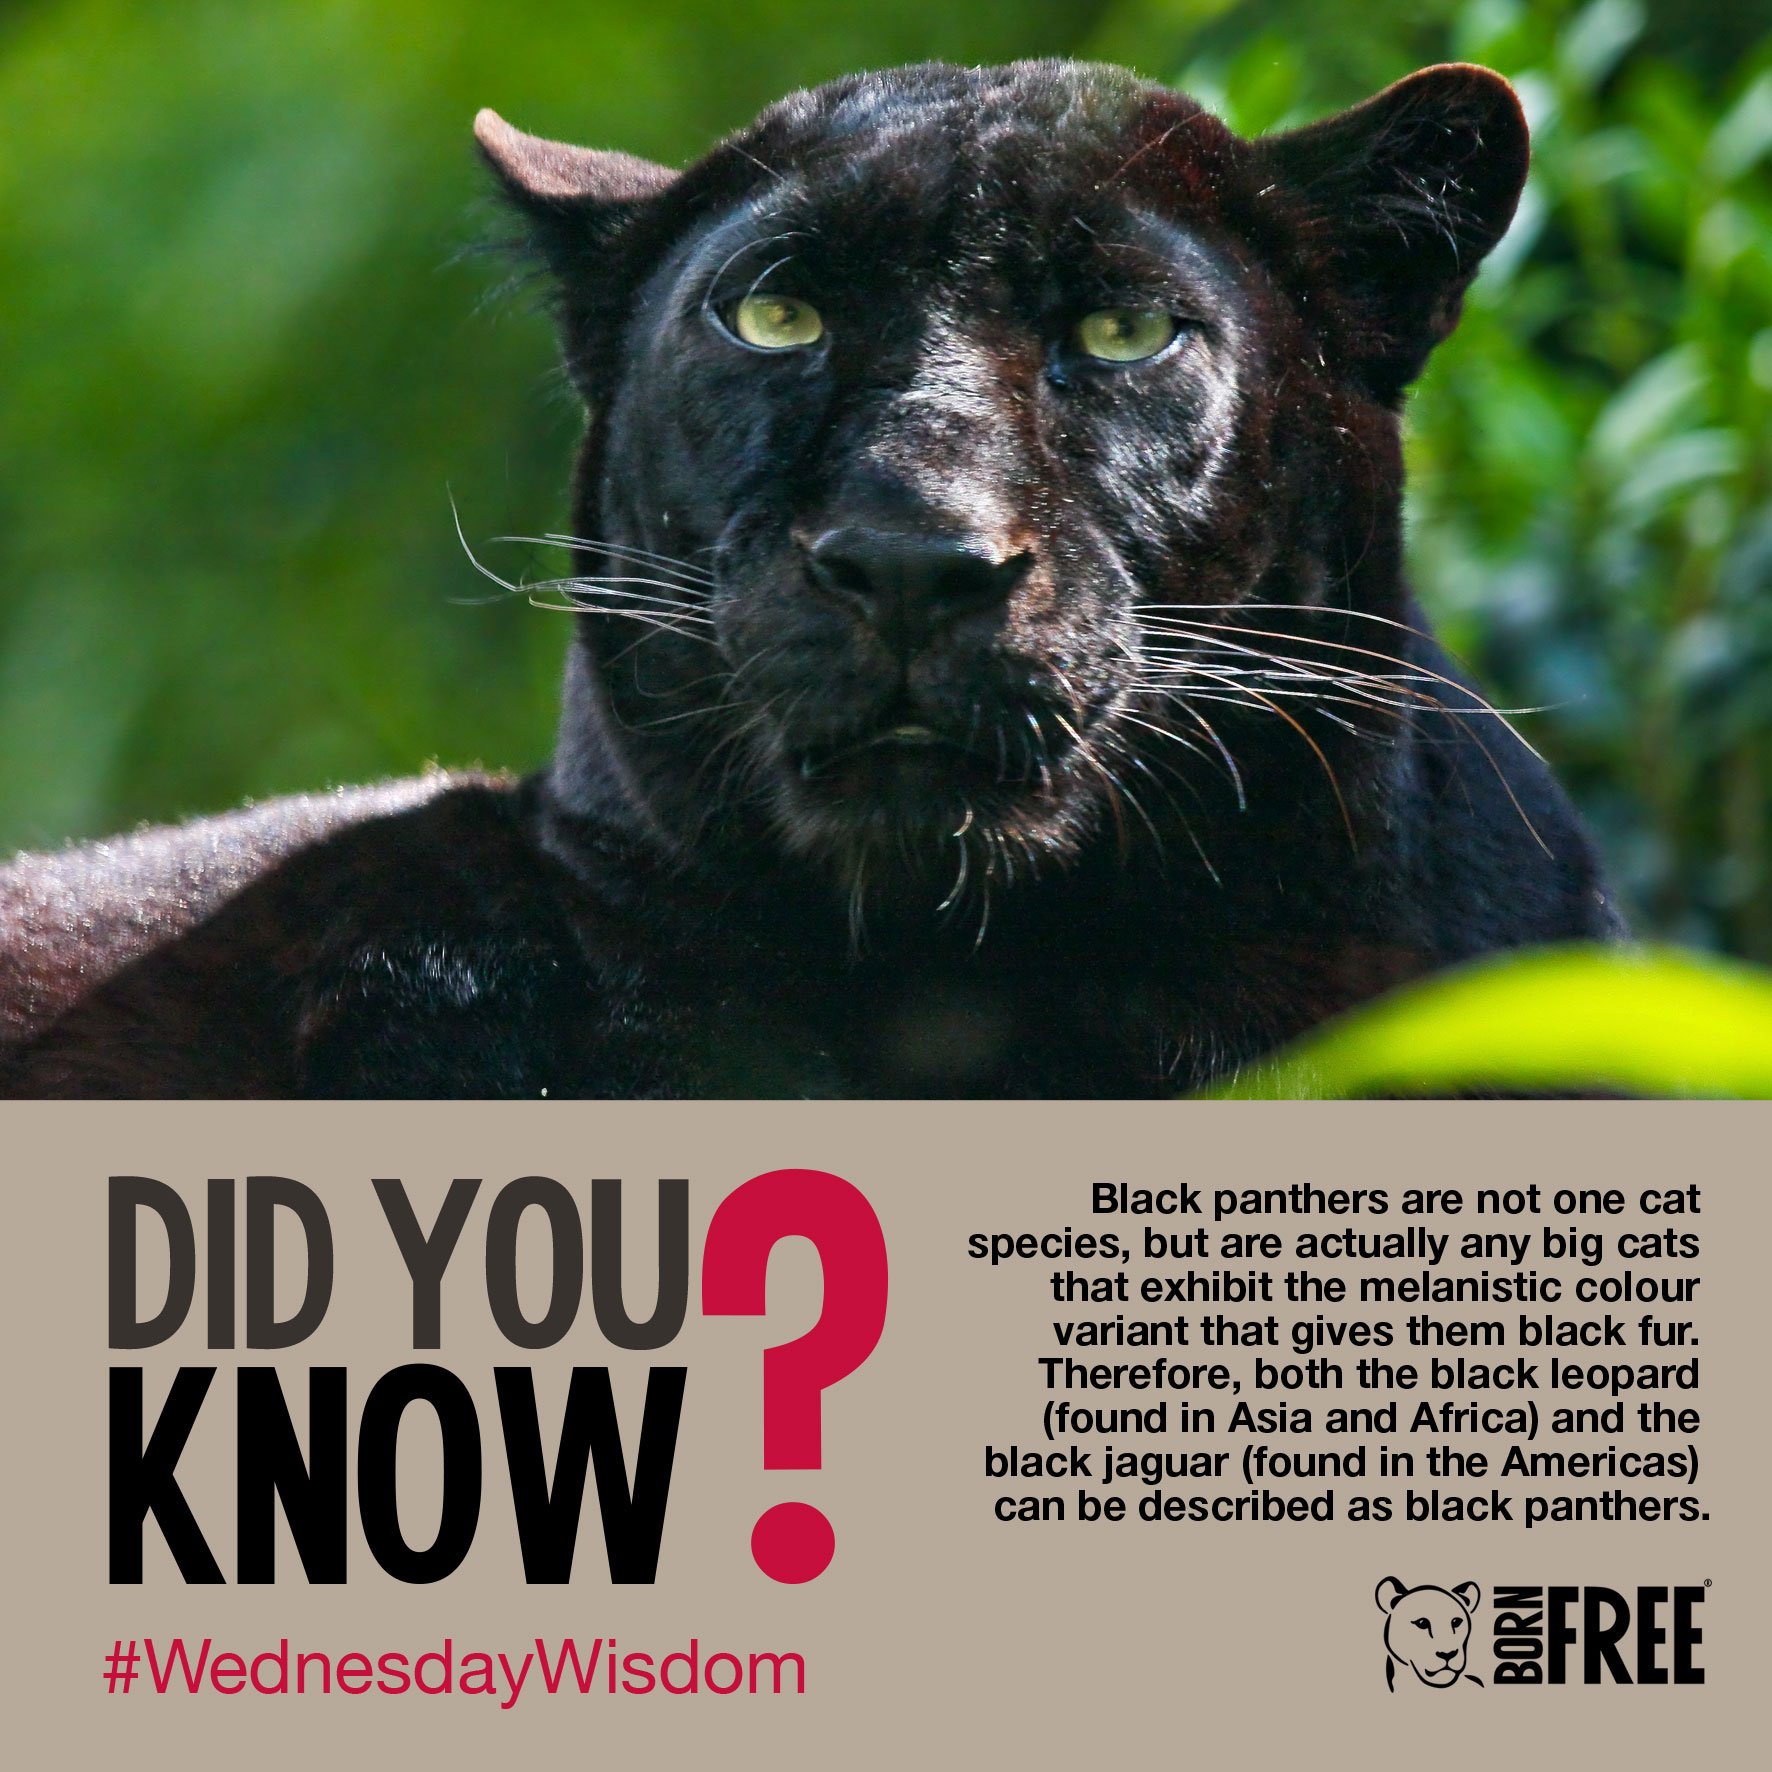 Born Free Foundation On Twitter Black Panthers Are Not One Cat Species But Are Actually Any Big Cats That Exhibit The Melanistic Colour Variant That Gives Them Black Fur Therefore Both The